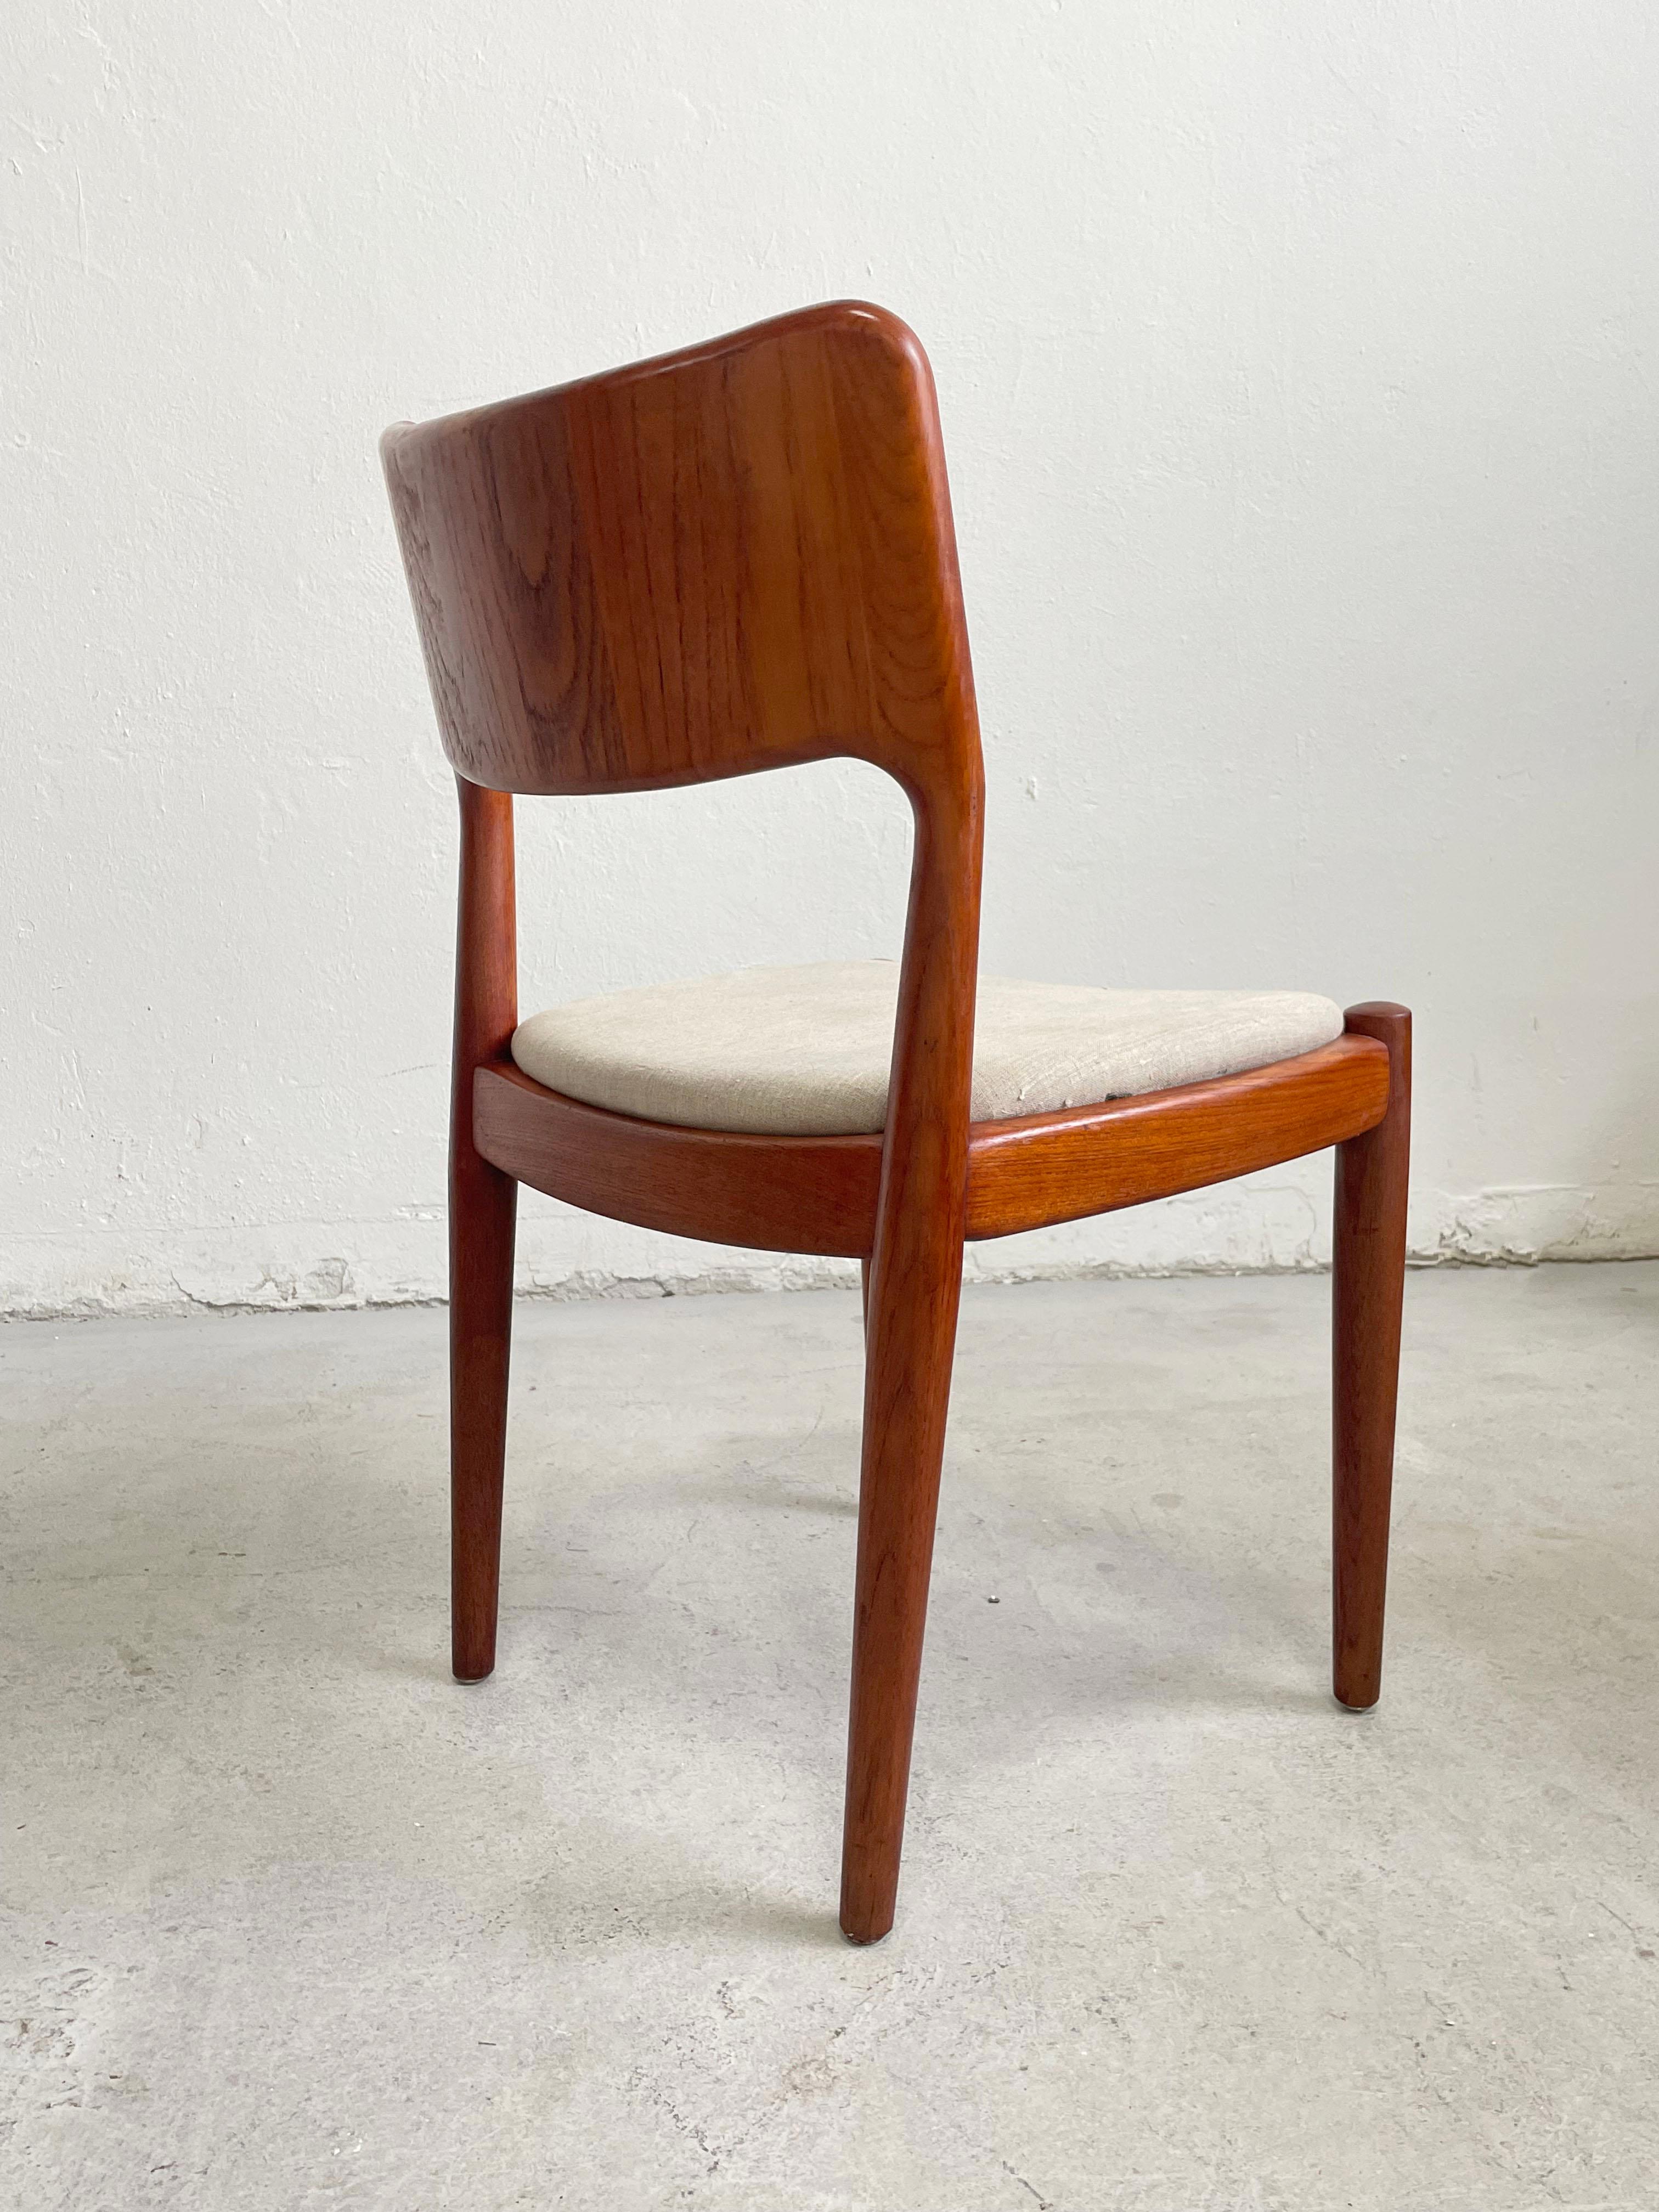 Set of 4 Vintage Scandinavian Mid-century Modern Teak Dining Chairs by Glostrup In Good Condition For Sale In Zagreb, HR